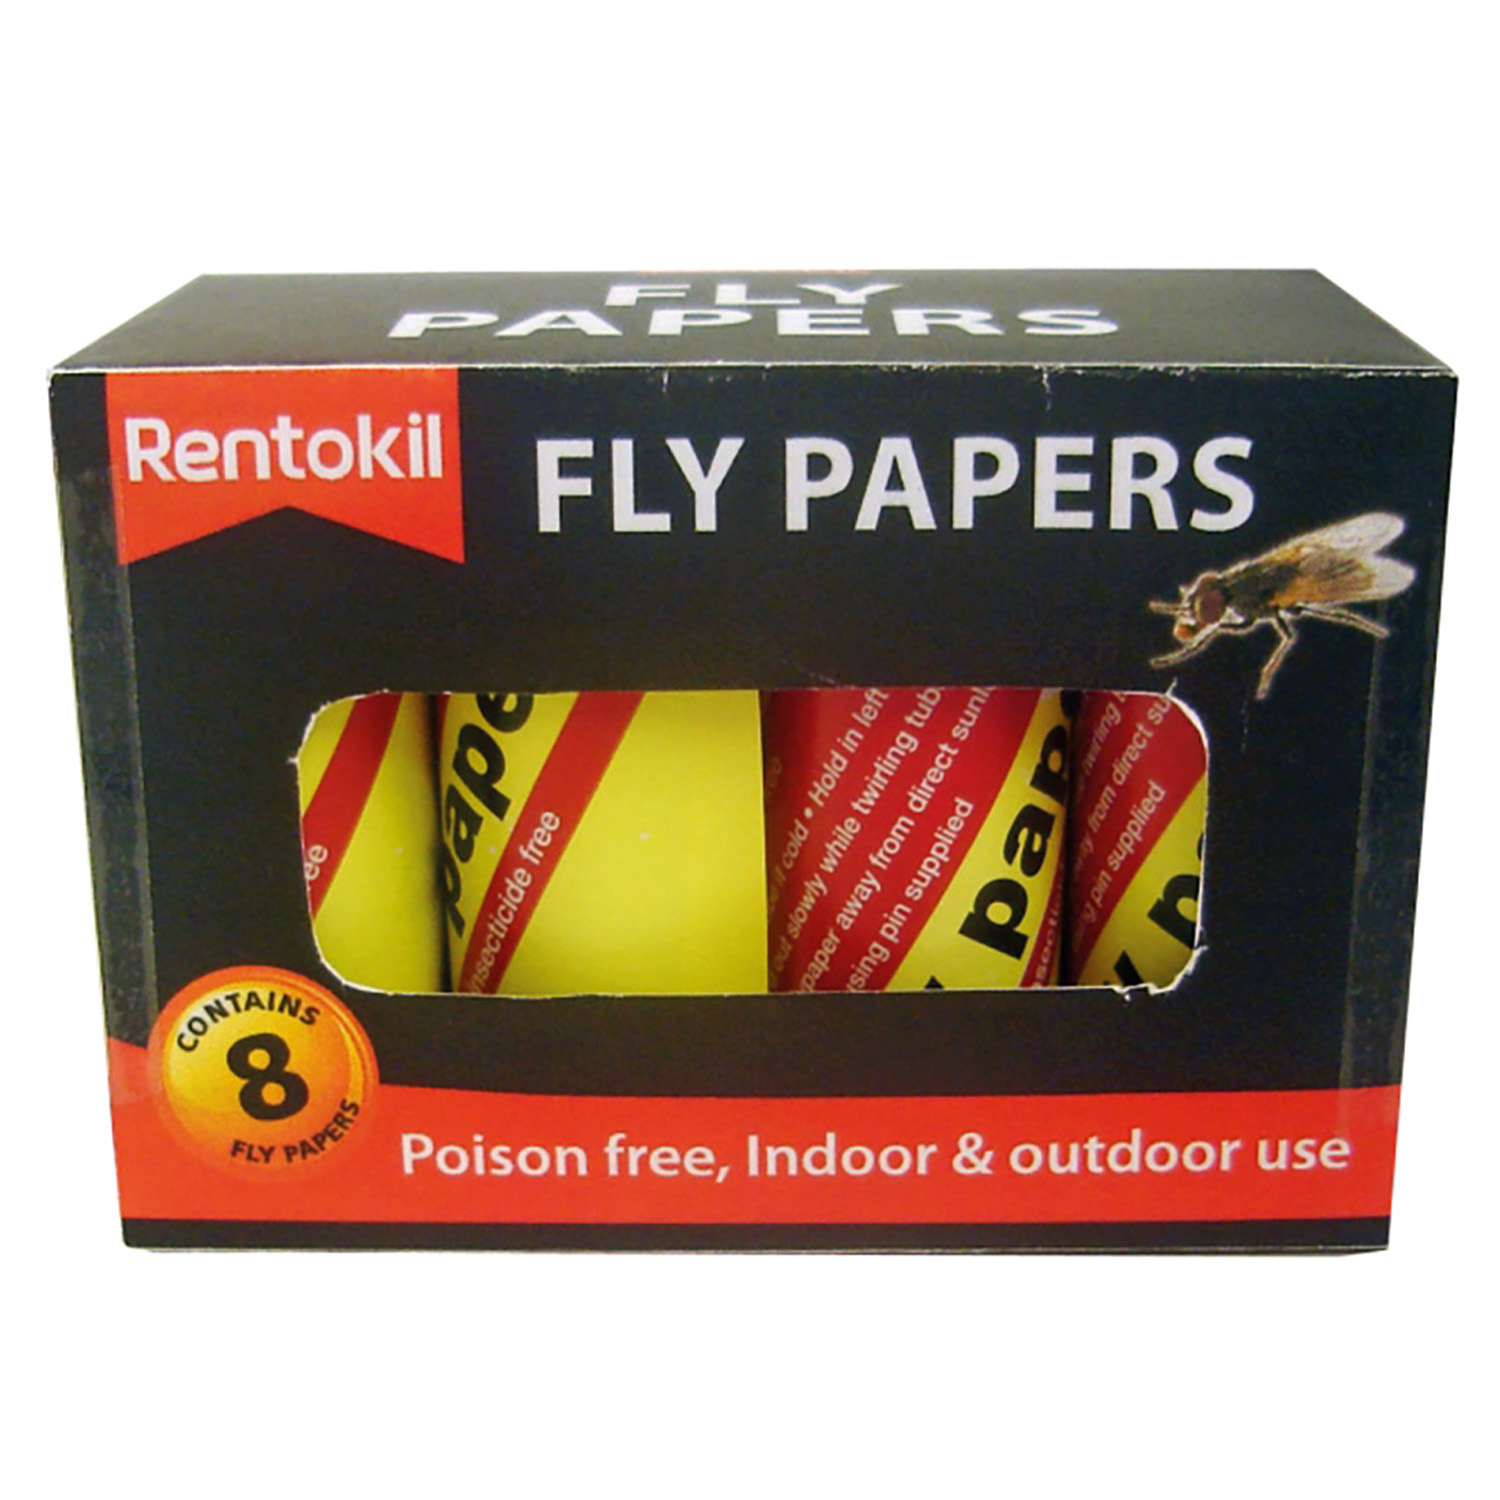 RENTOKIL FLY PAPERS 12 X 8 PACK